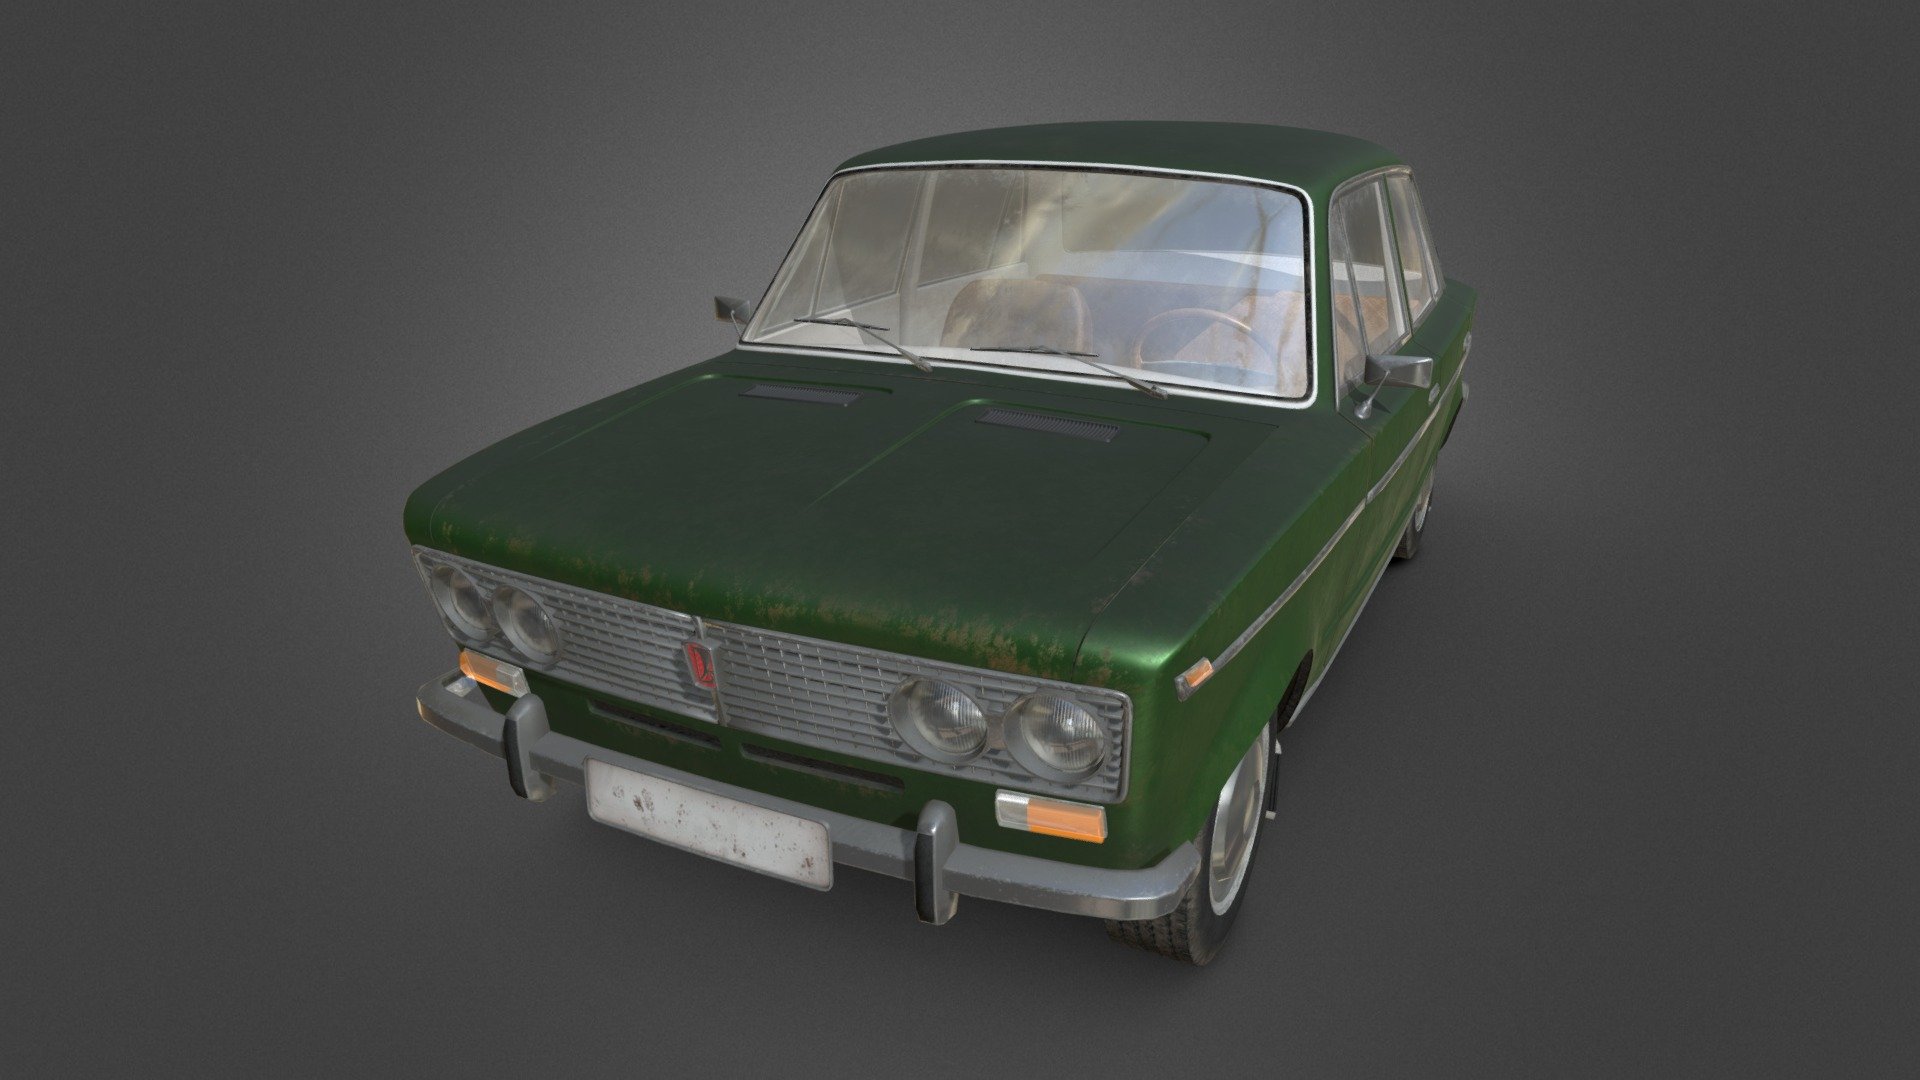 USSR auto VAZ-2013 old look. 
Modelled in Blender, unwrapped in Rizom, textures in Substance Painter 3d model